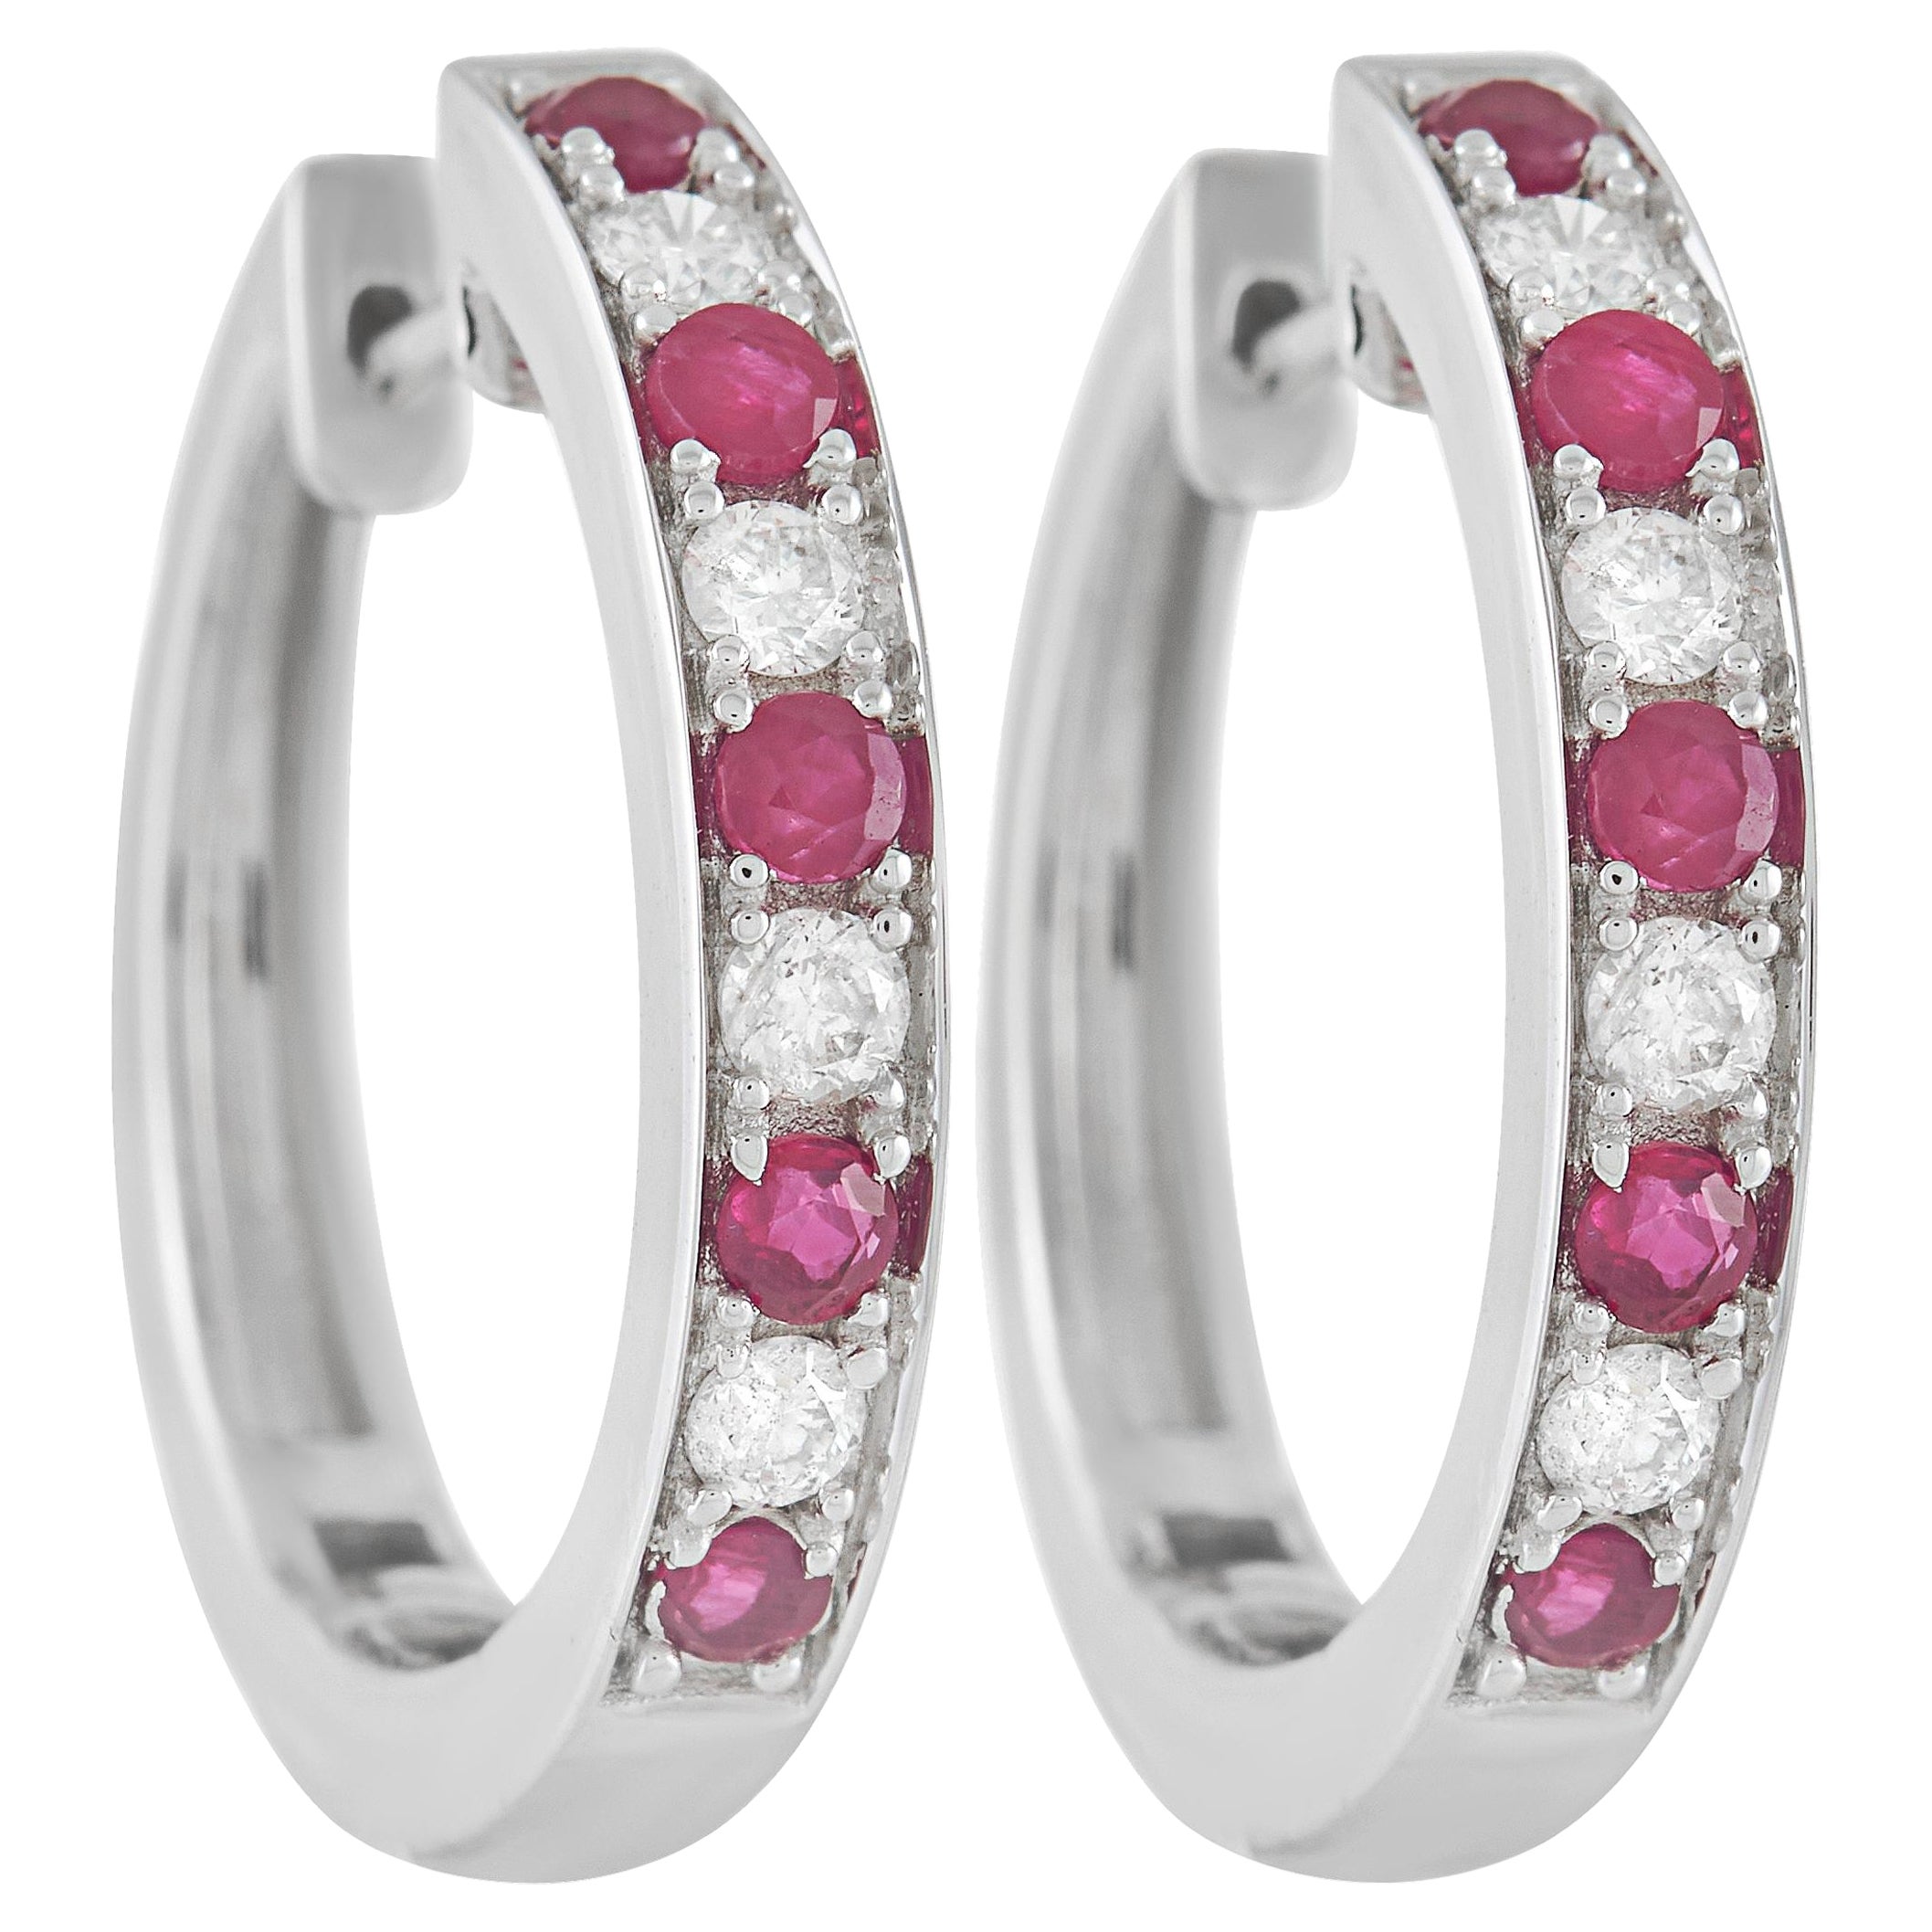 LB Exclusive 14K White Gold 0.25 Ct Diamond and 0.42 Ct Ruby Hoop Earrings